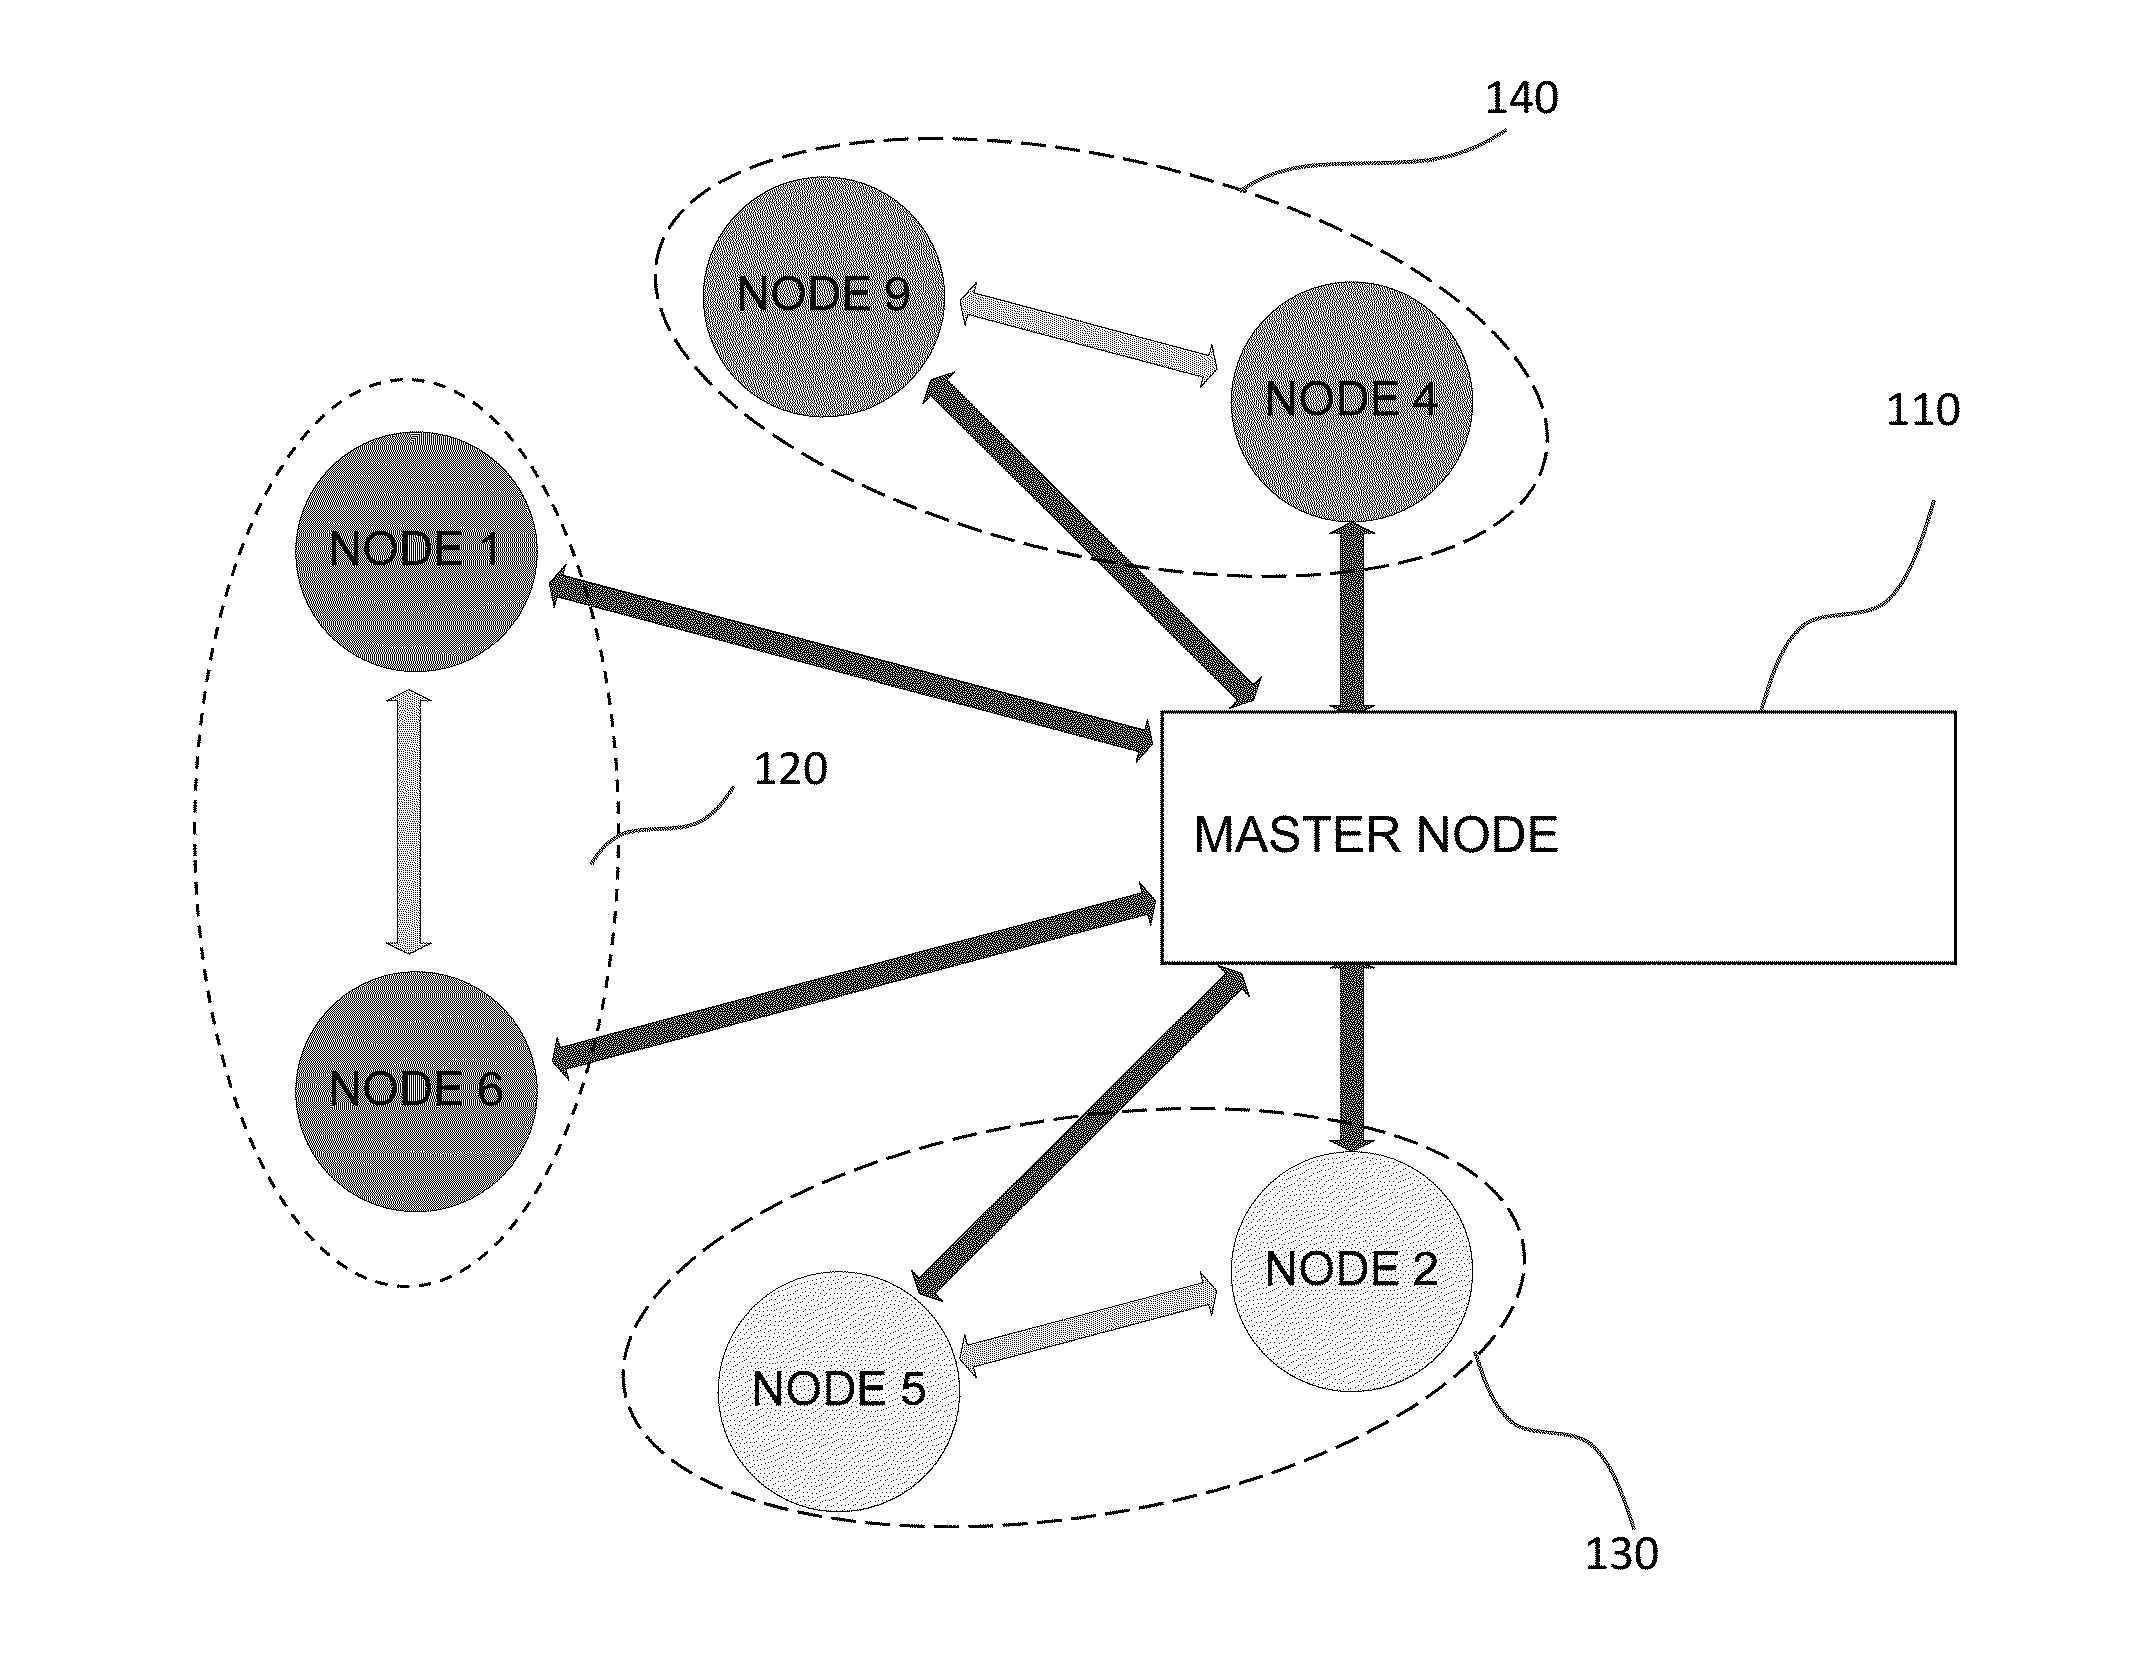 System and method for monitoring and diagnosing patient condition based on wireless sensor monitoring data